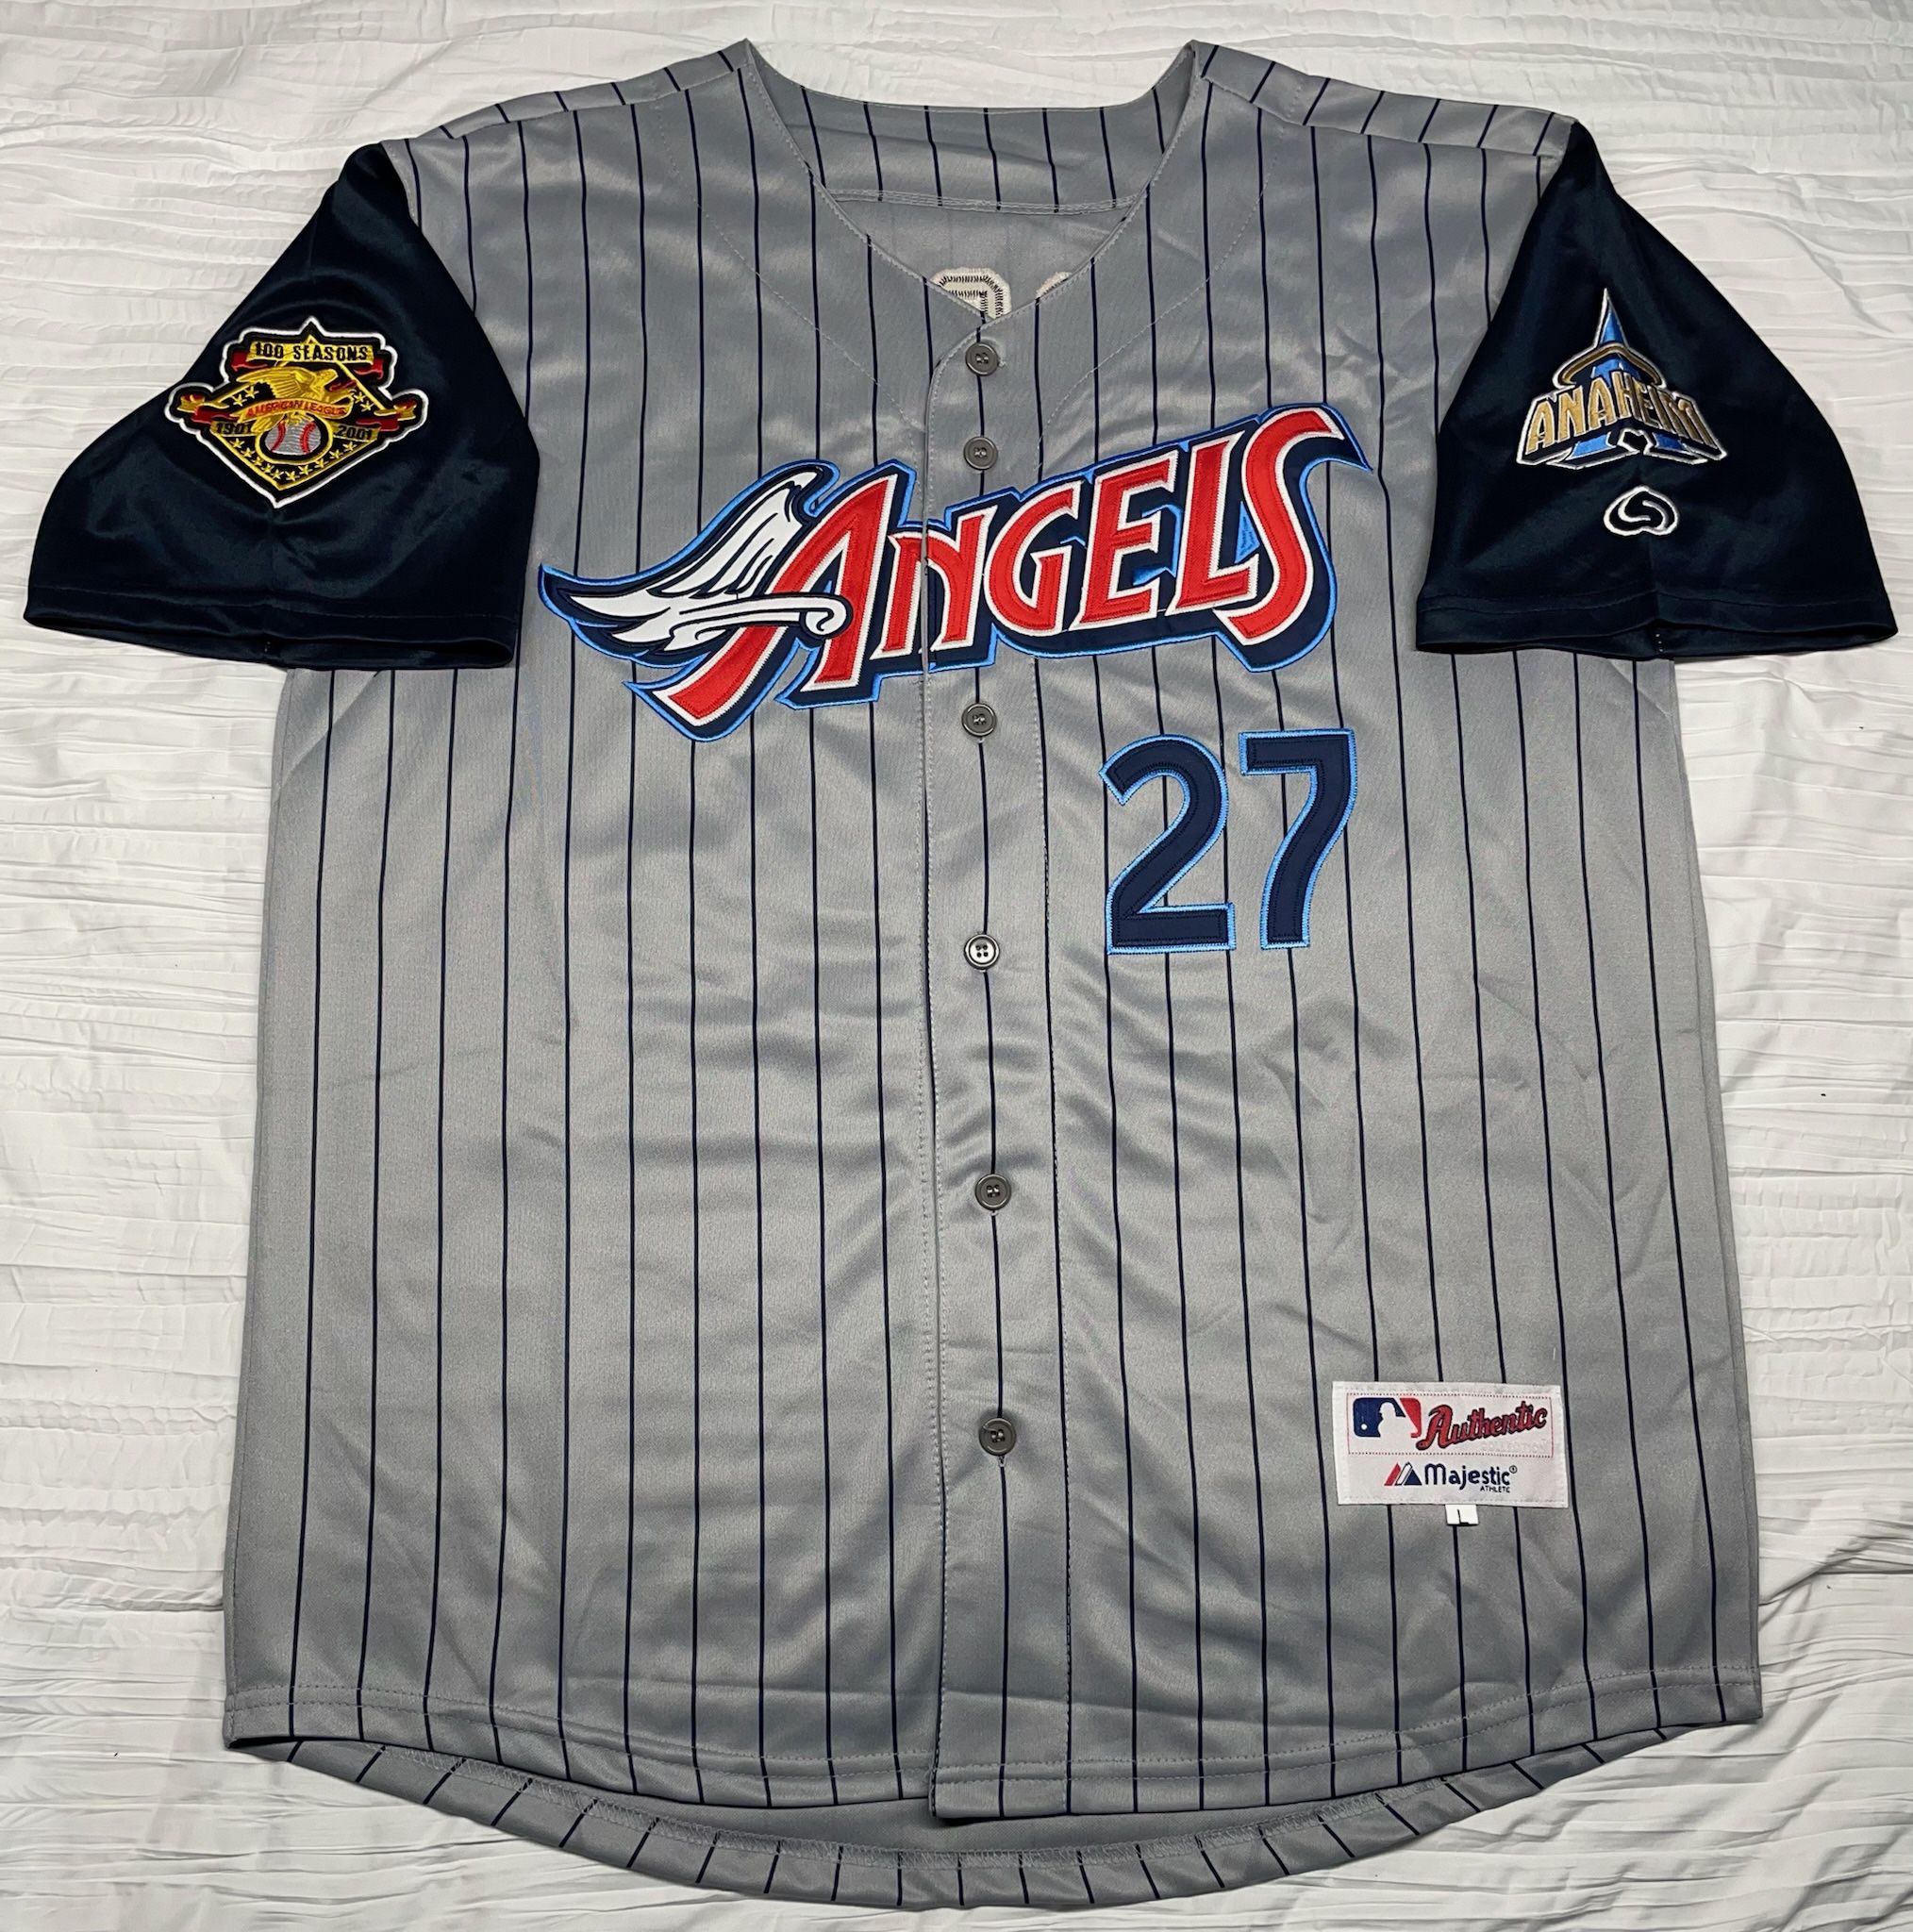 angels throwback jersey